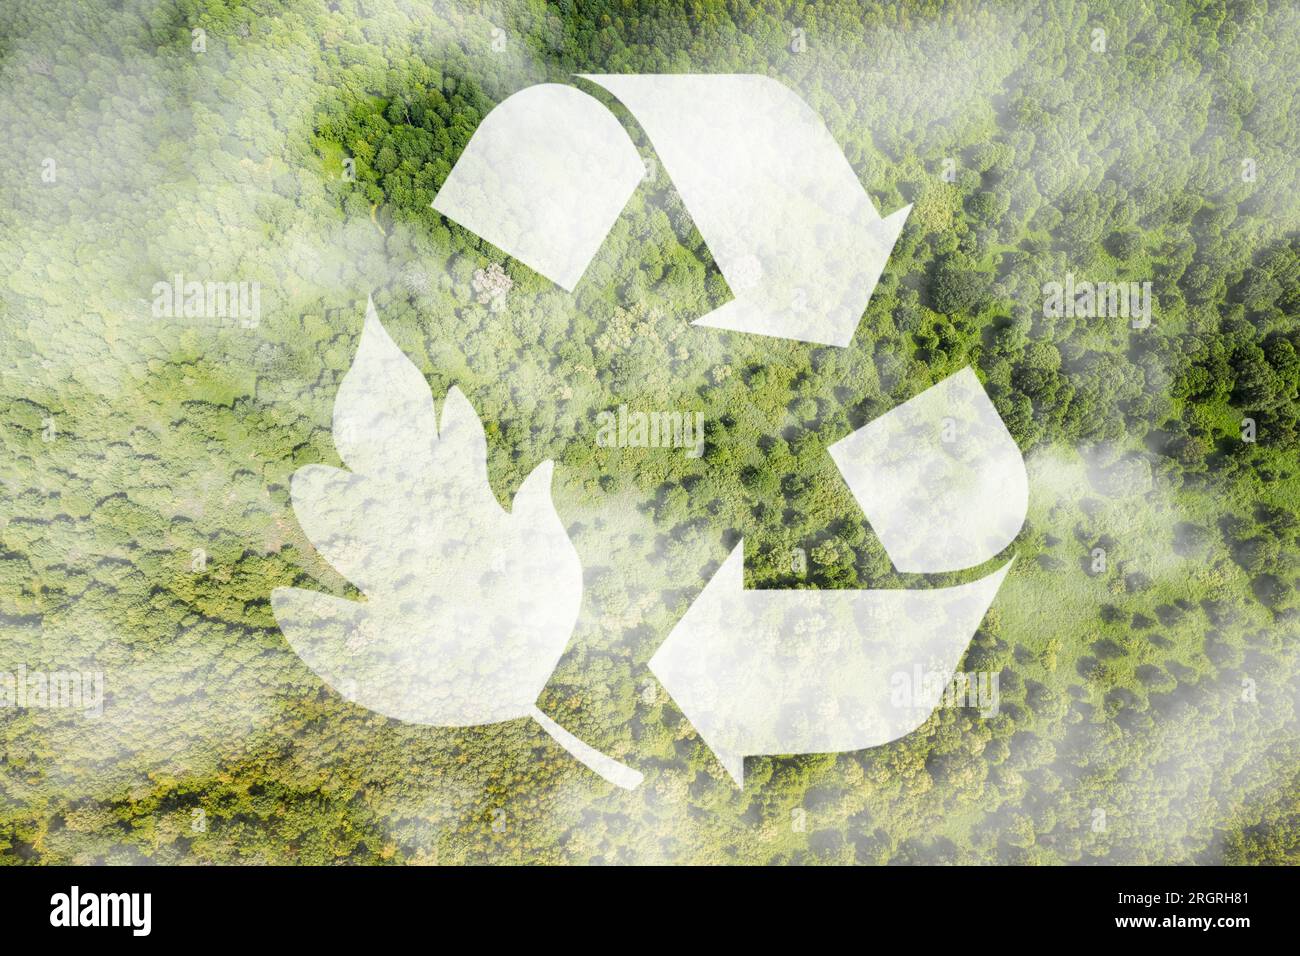 Recycle and Zero waste symbol in the middle of a beautiful untouched jungle for Sustainable environment development goals on Top view of nature. SDGs. Stock Photo